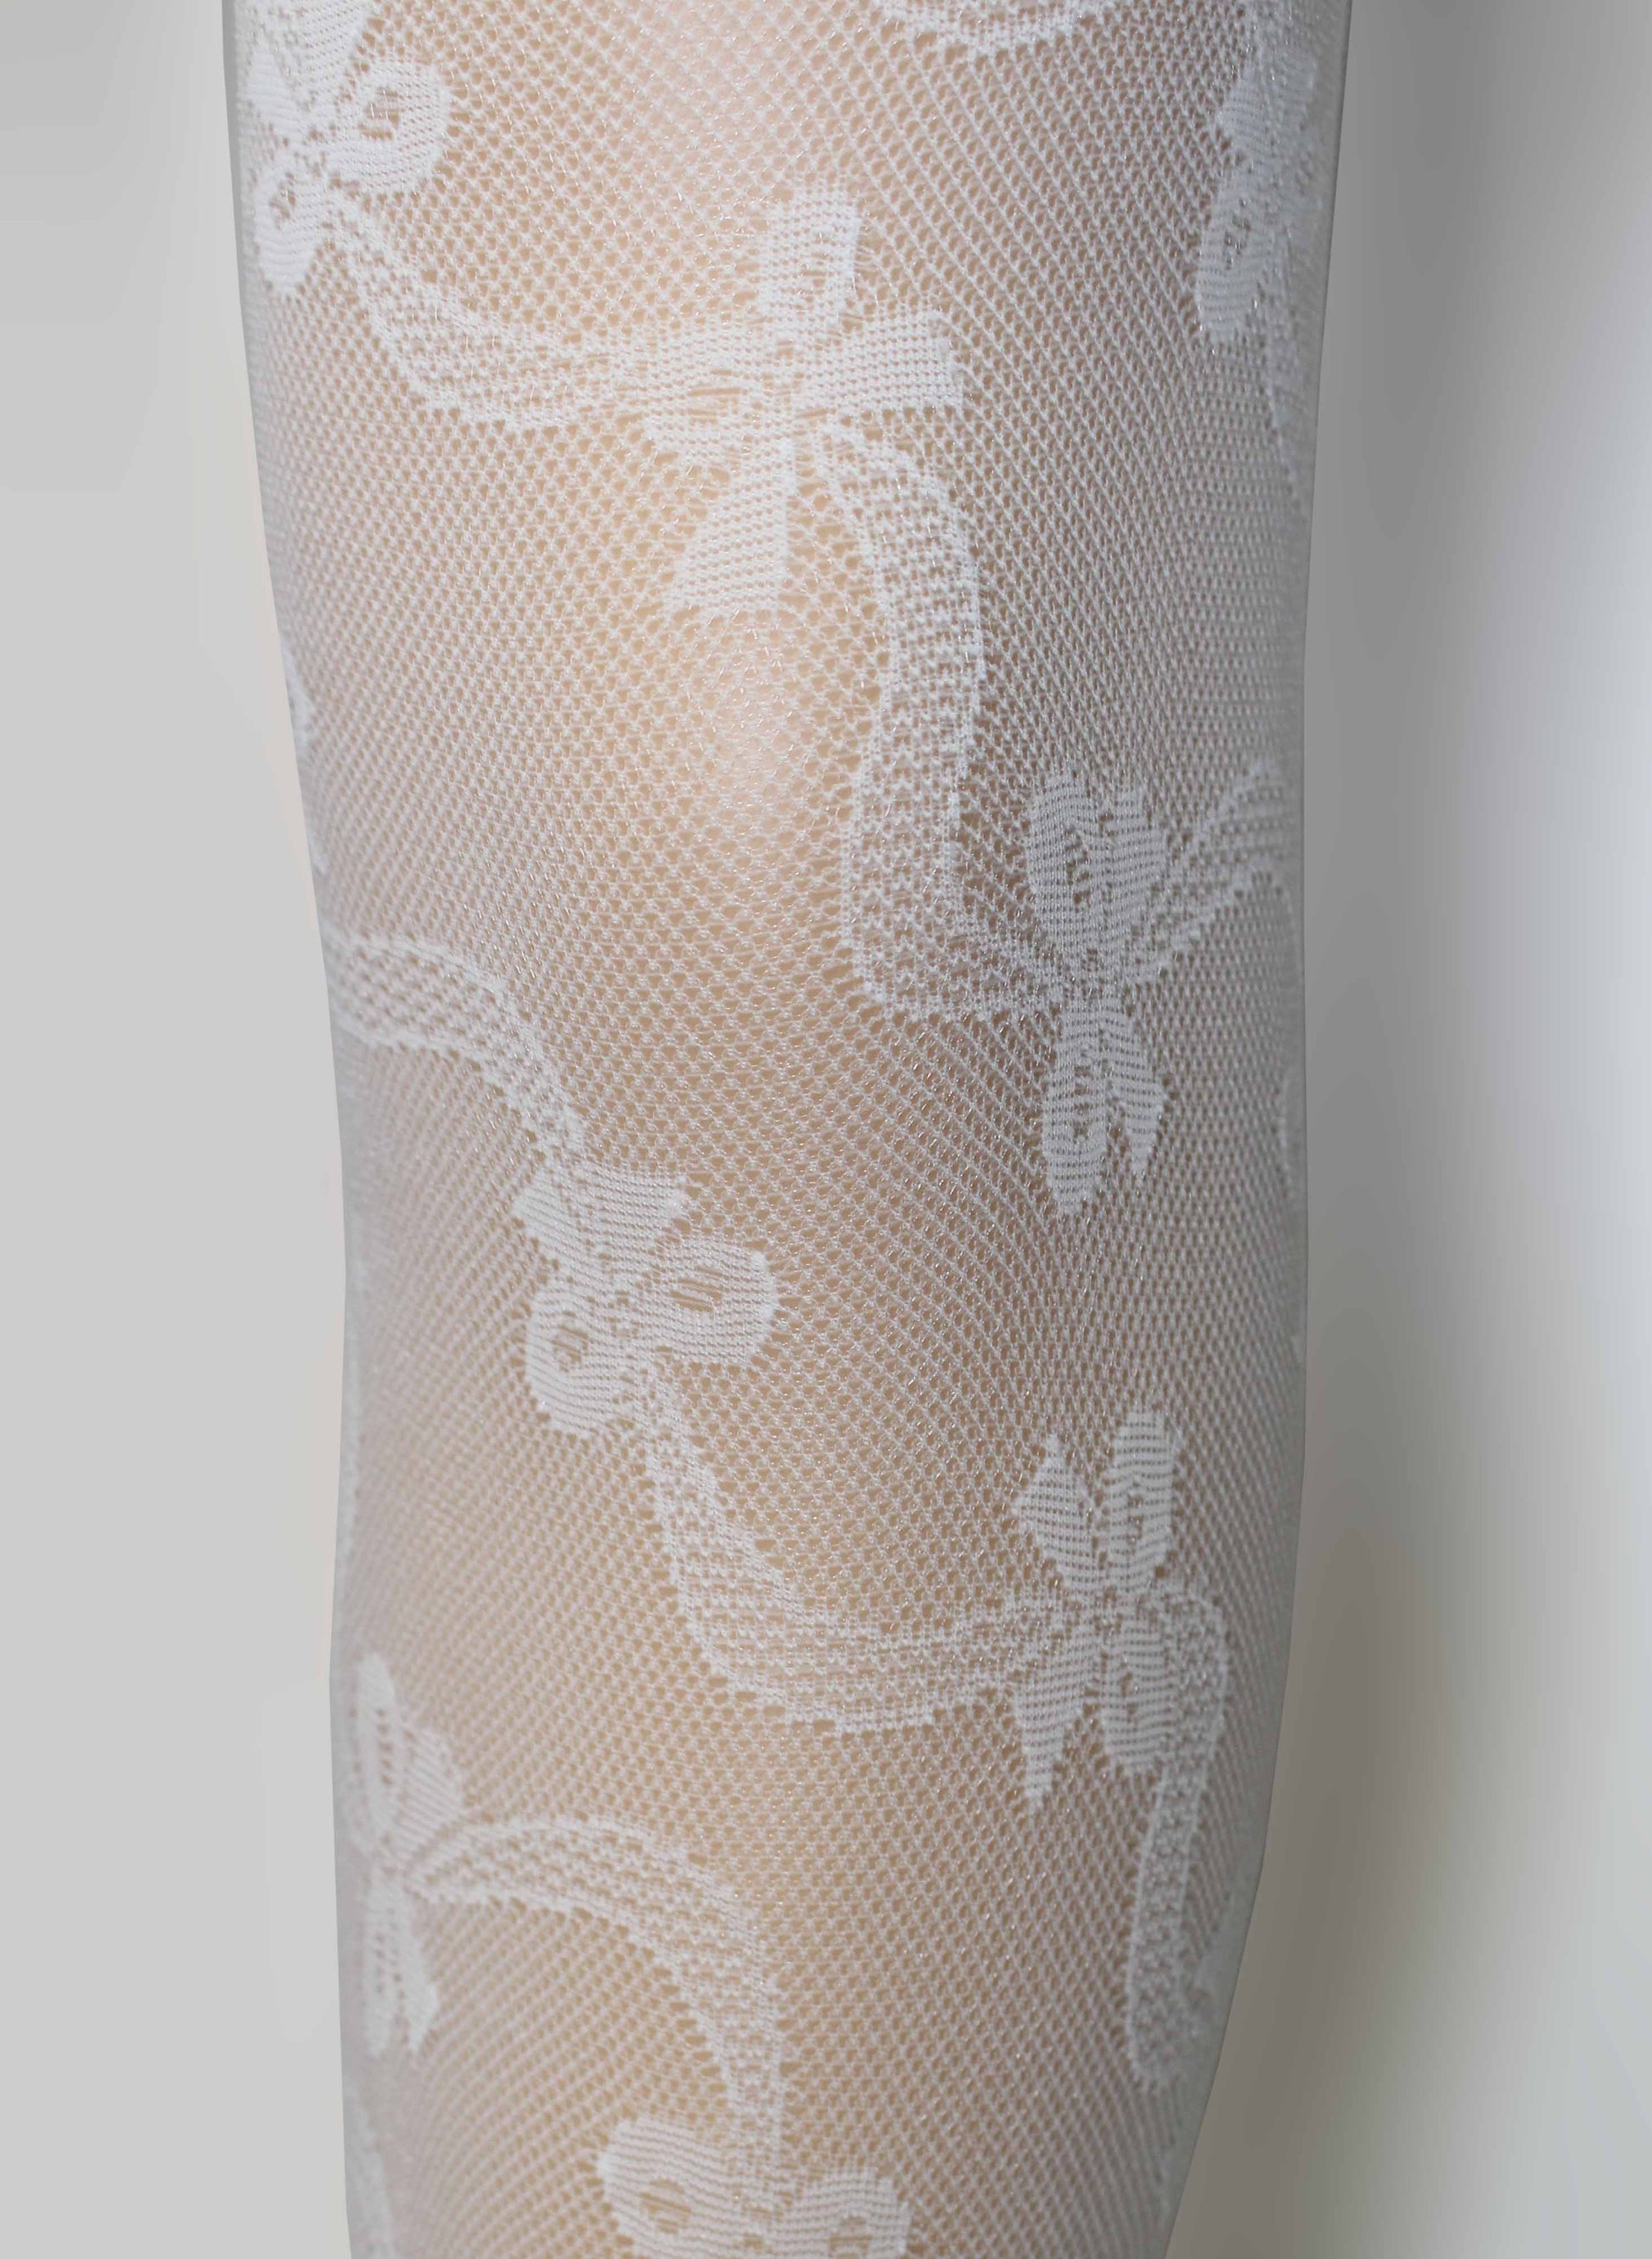 Omsa Serenella Gala Tights - White semi opaque kid's fashion tights with a woven ribbon and bow style pattern, perfect for communions and weddings